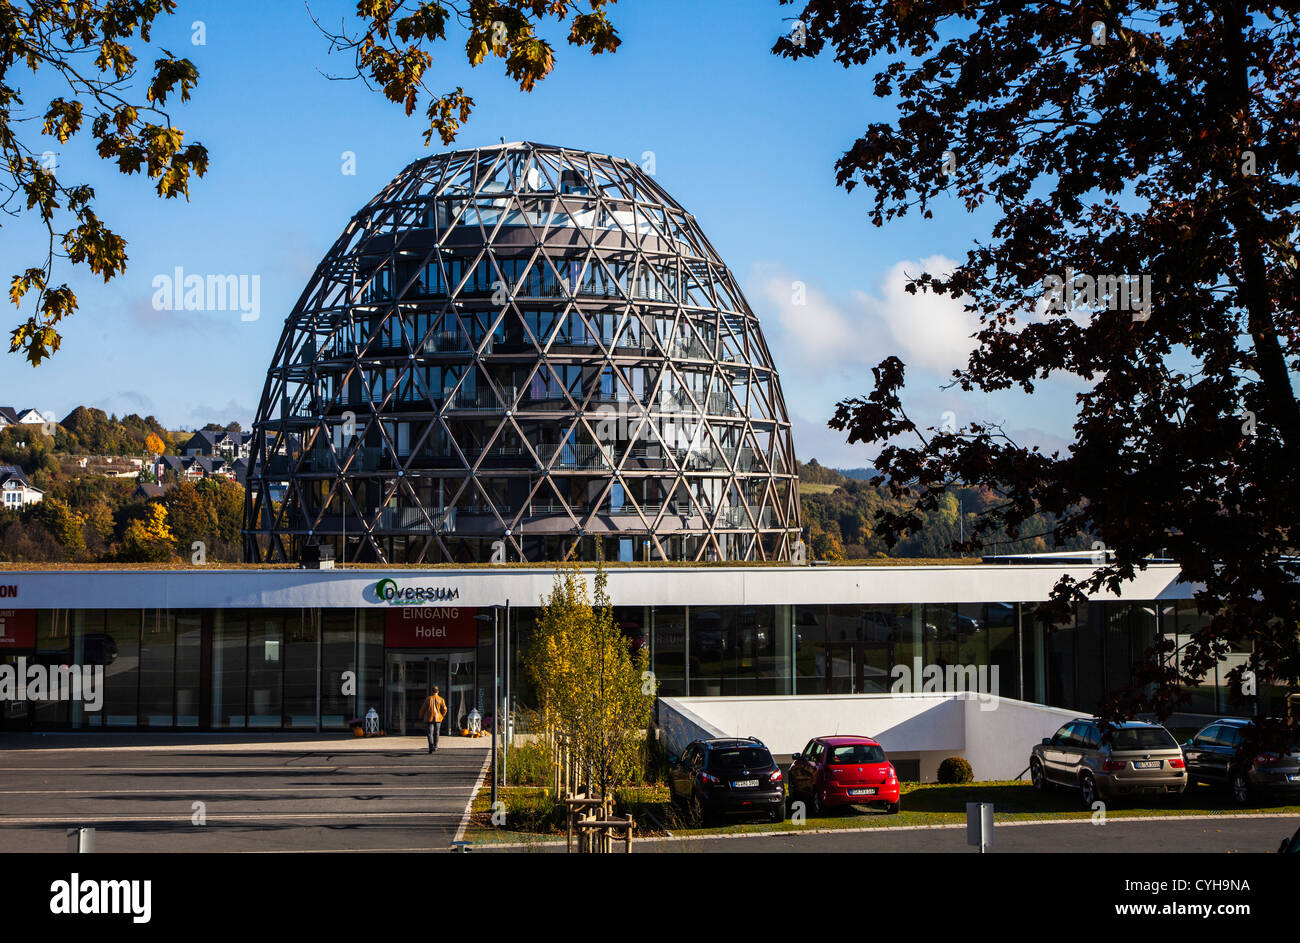 Oversum hotel and spa resort. Hotel building in shape of an egg. Winterberg, Germany Stock Photo